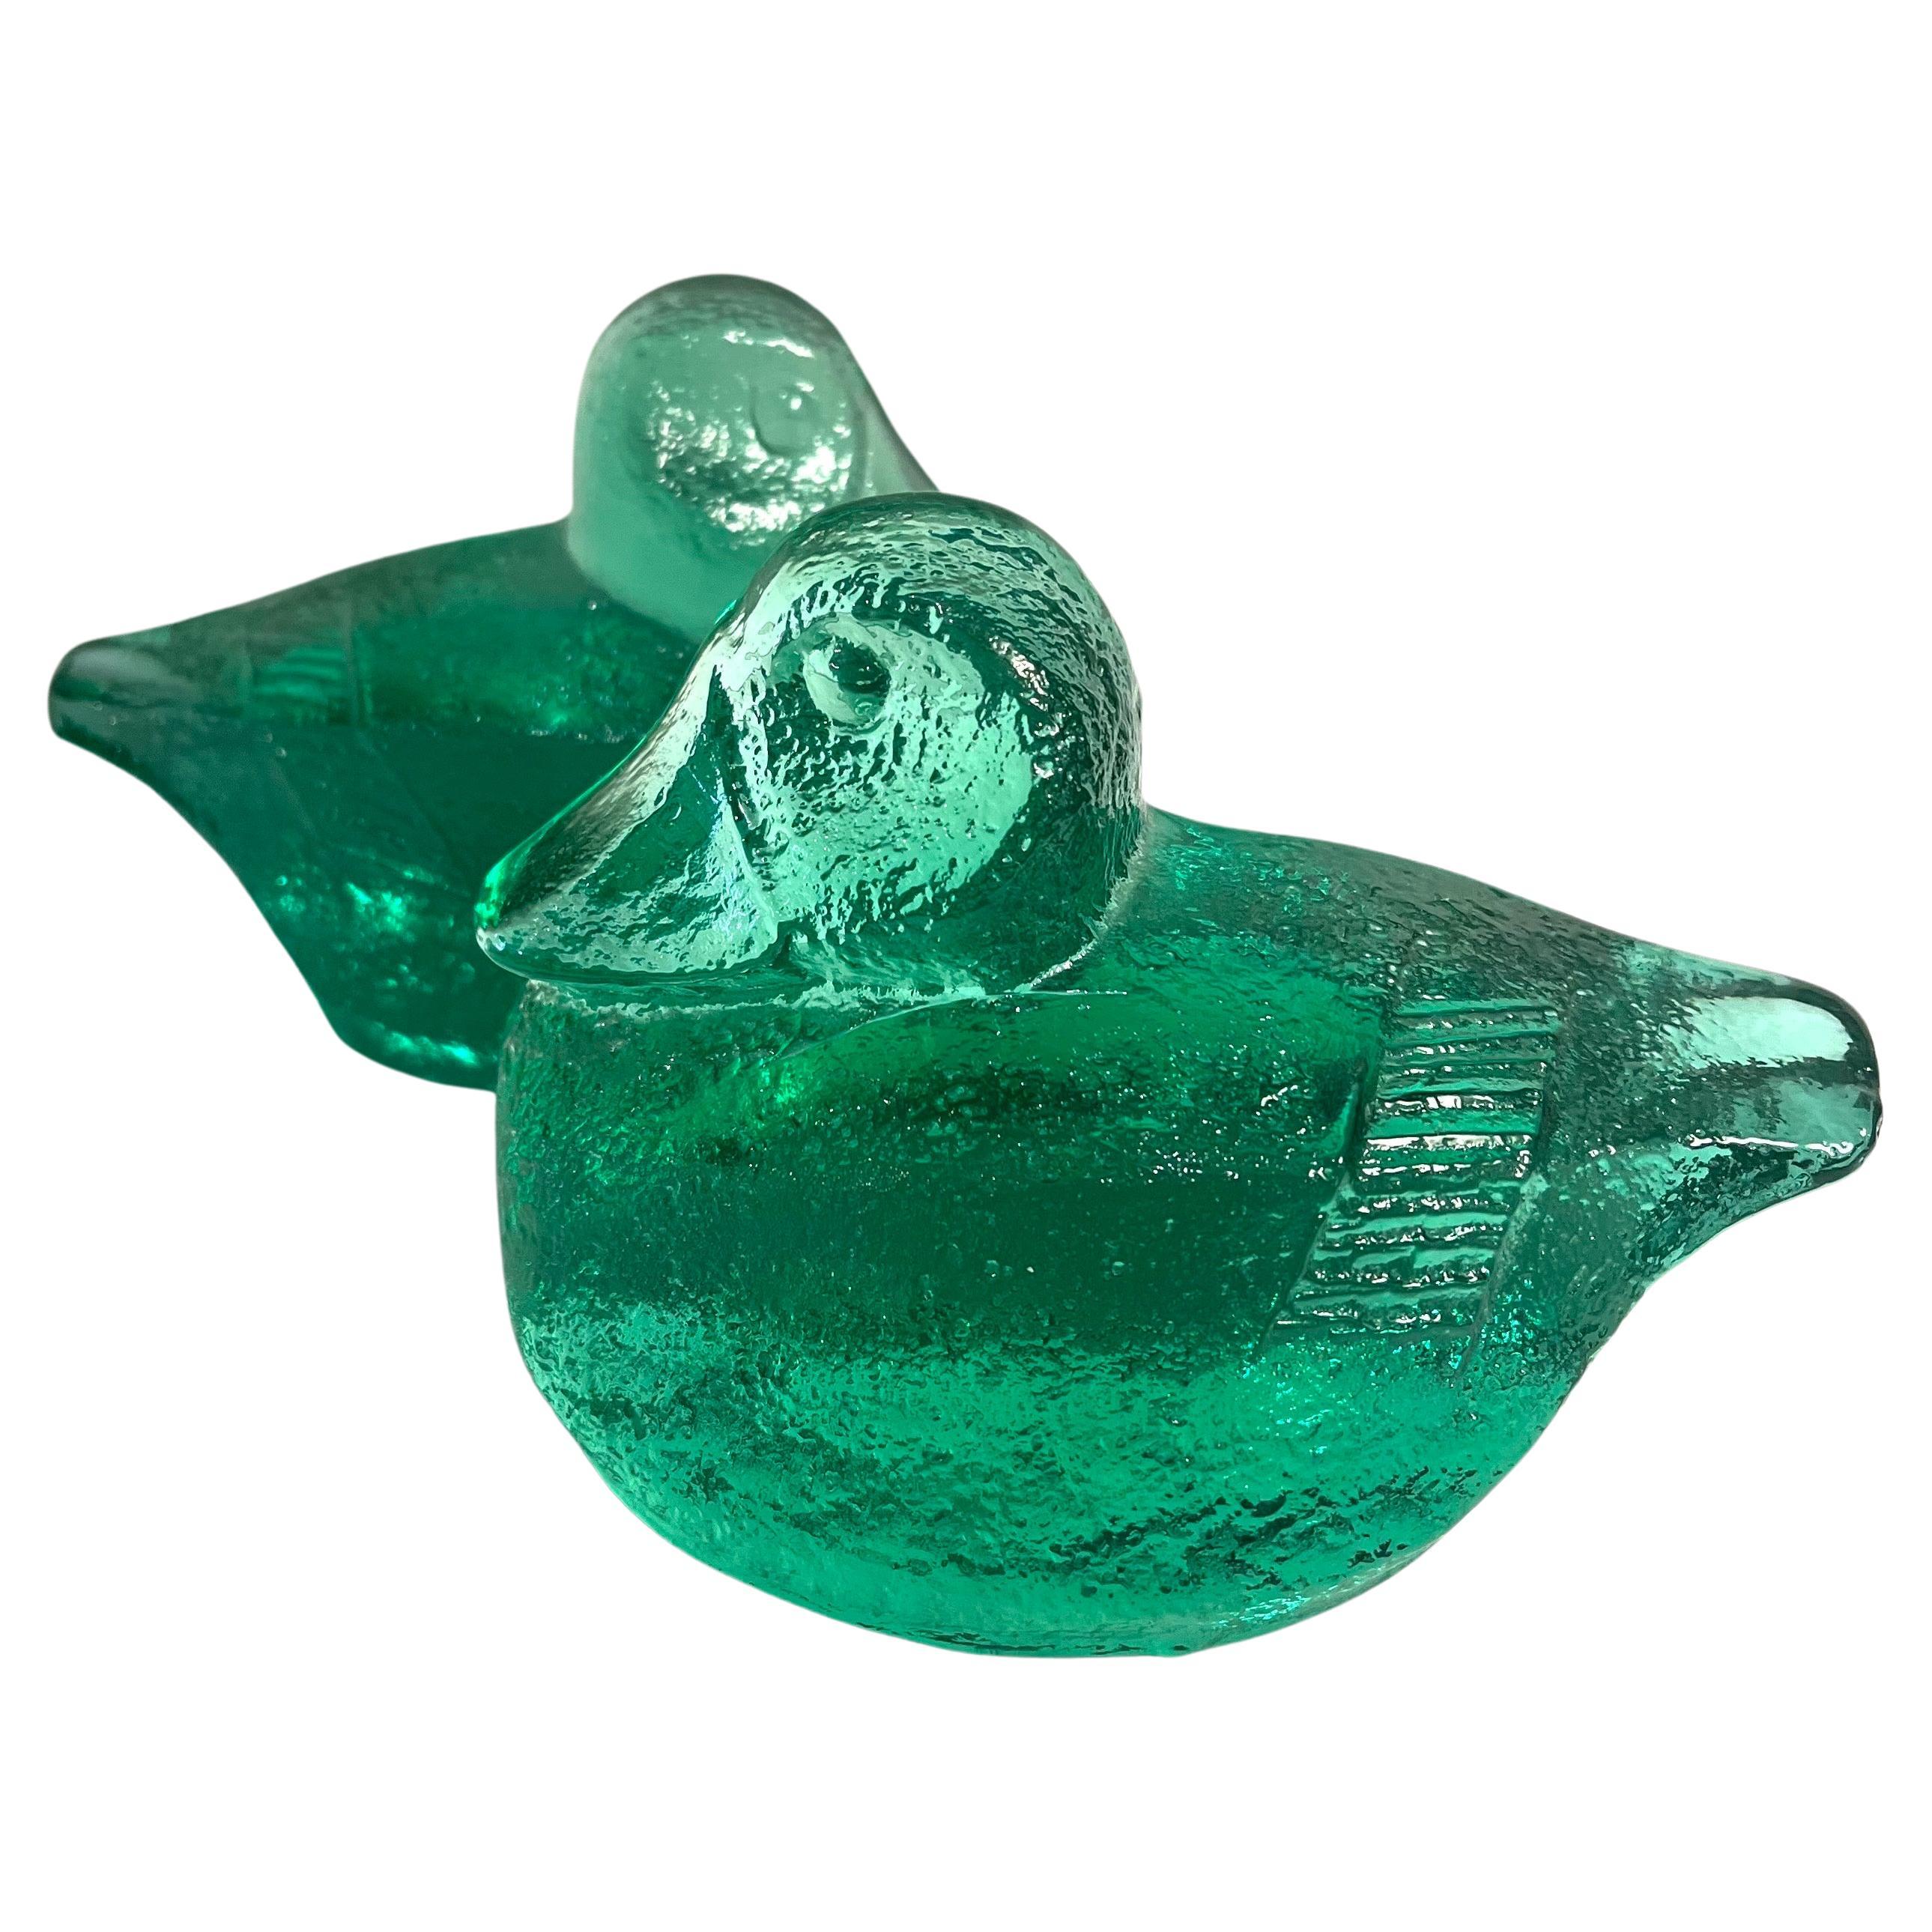 Pair of Rare Emerald Green Glass Bookends by Blenko For Sale